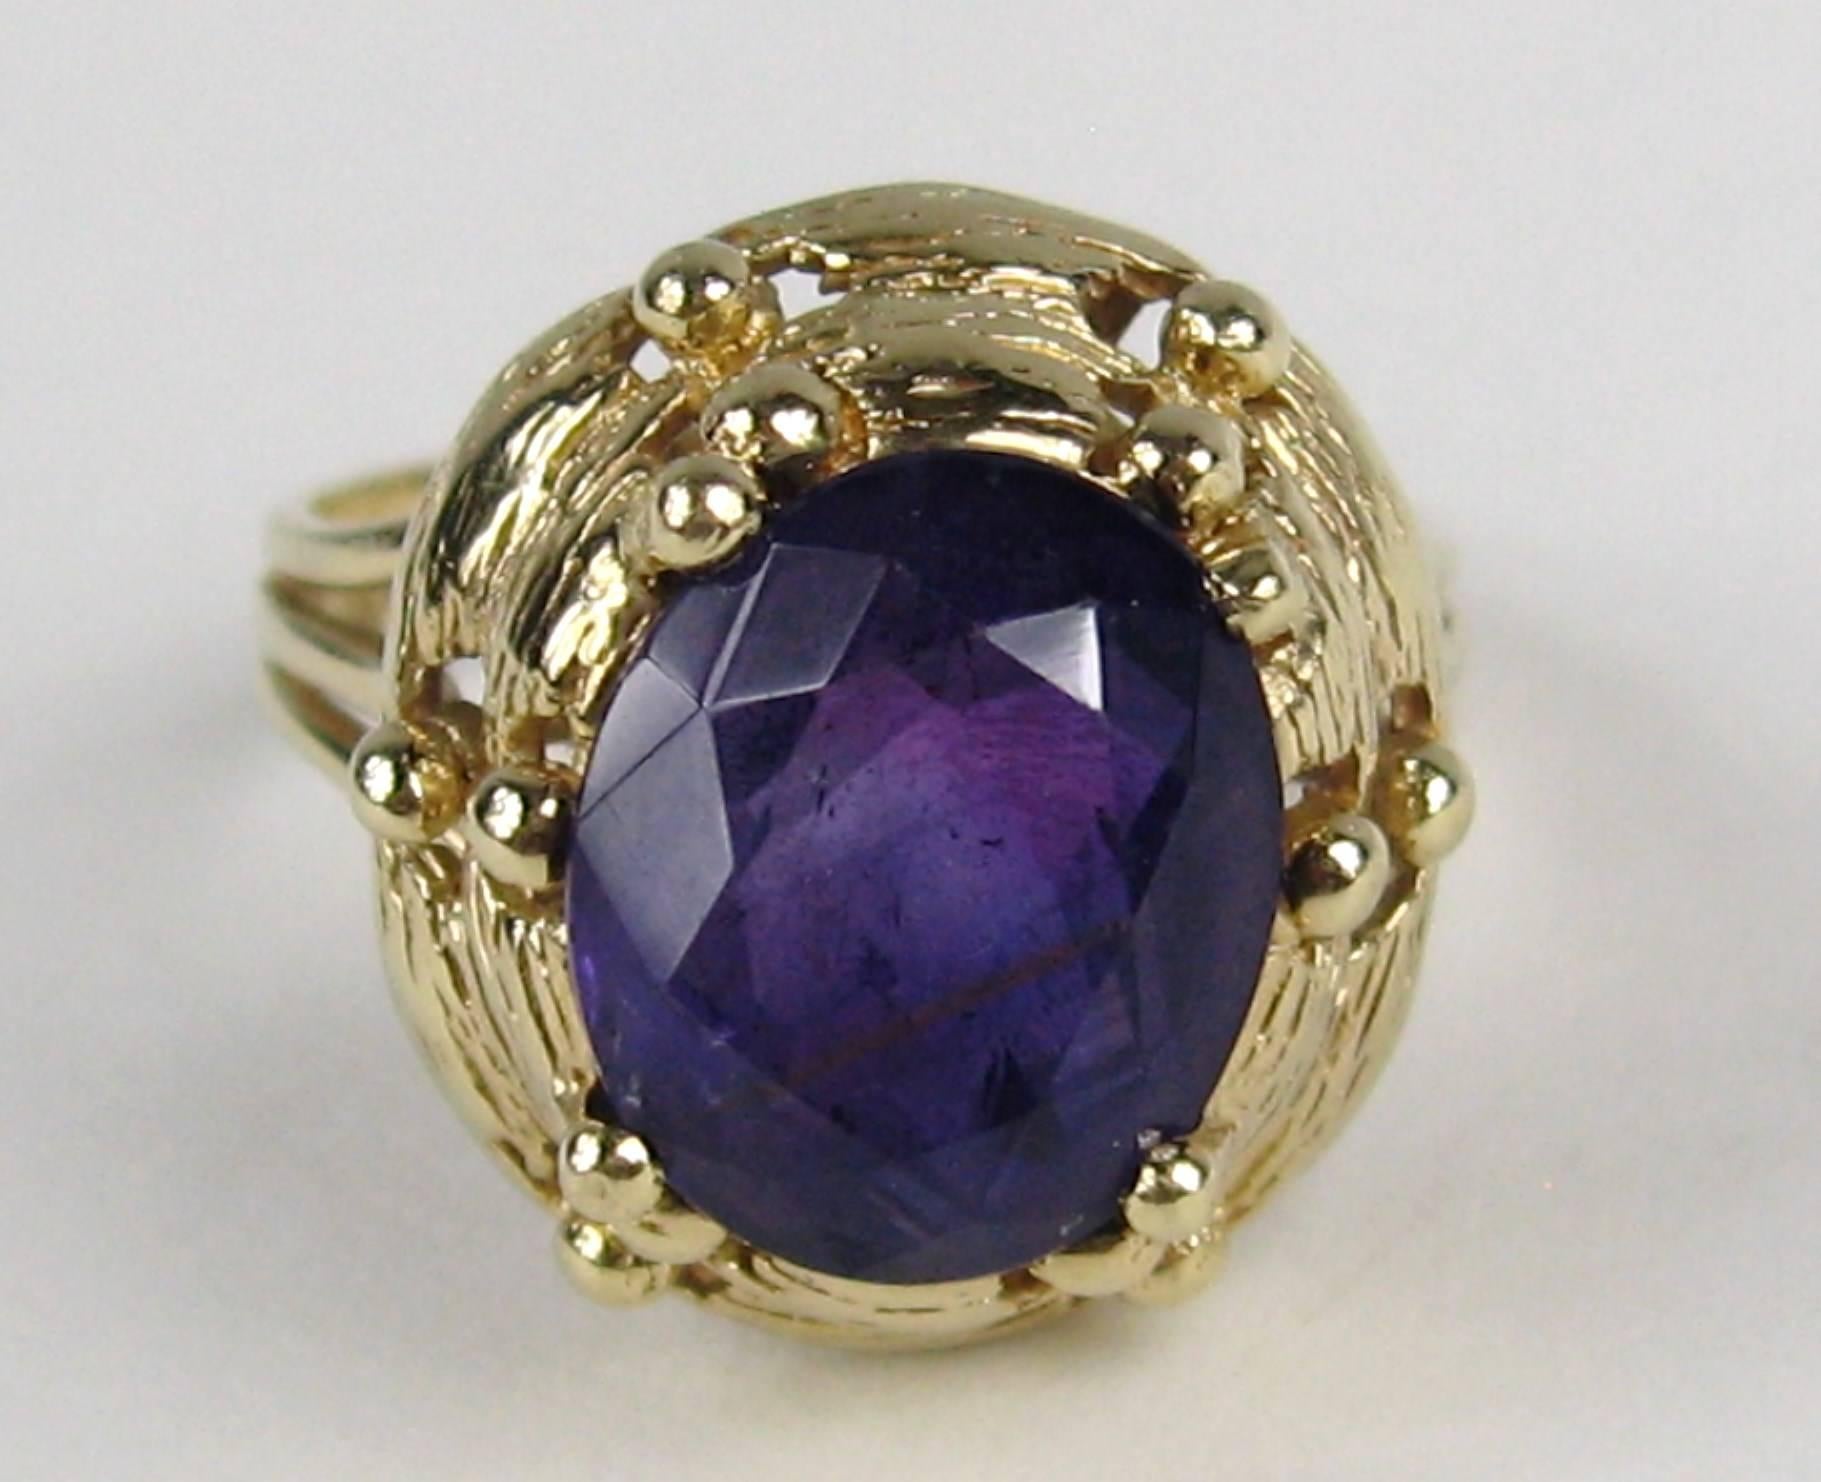 Oval Amethyst Approximately 3.60 Carats set in 14k Gold, Size is 7.5. Ring is set high .45 in. Ring can be sized by us or your jeweler.  Please check our storefront for hundreds of pieces of jewelry including hundreds of New Old Stock pieces of